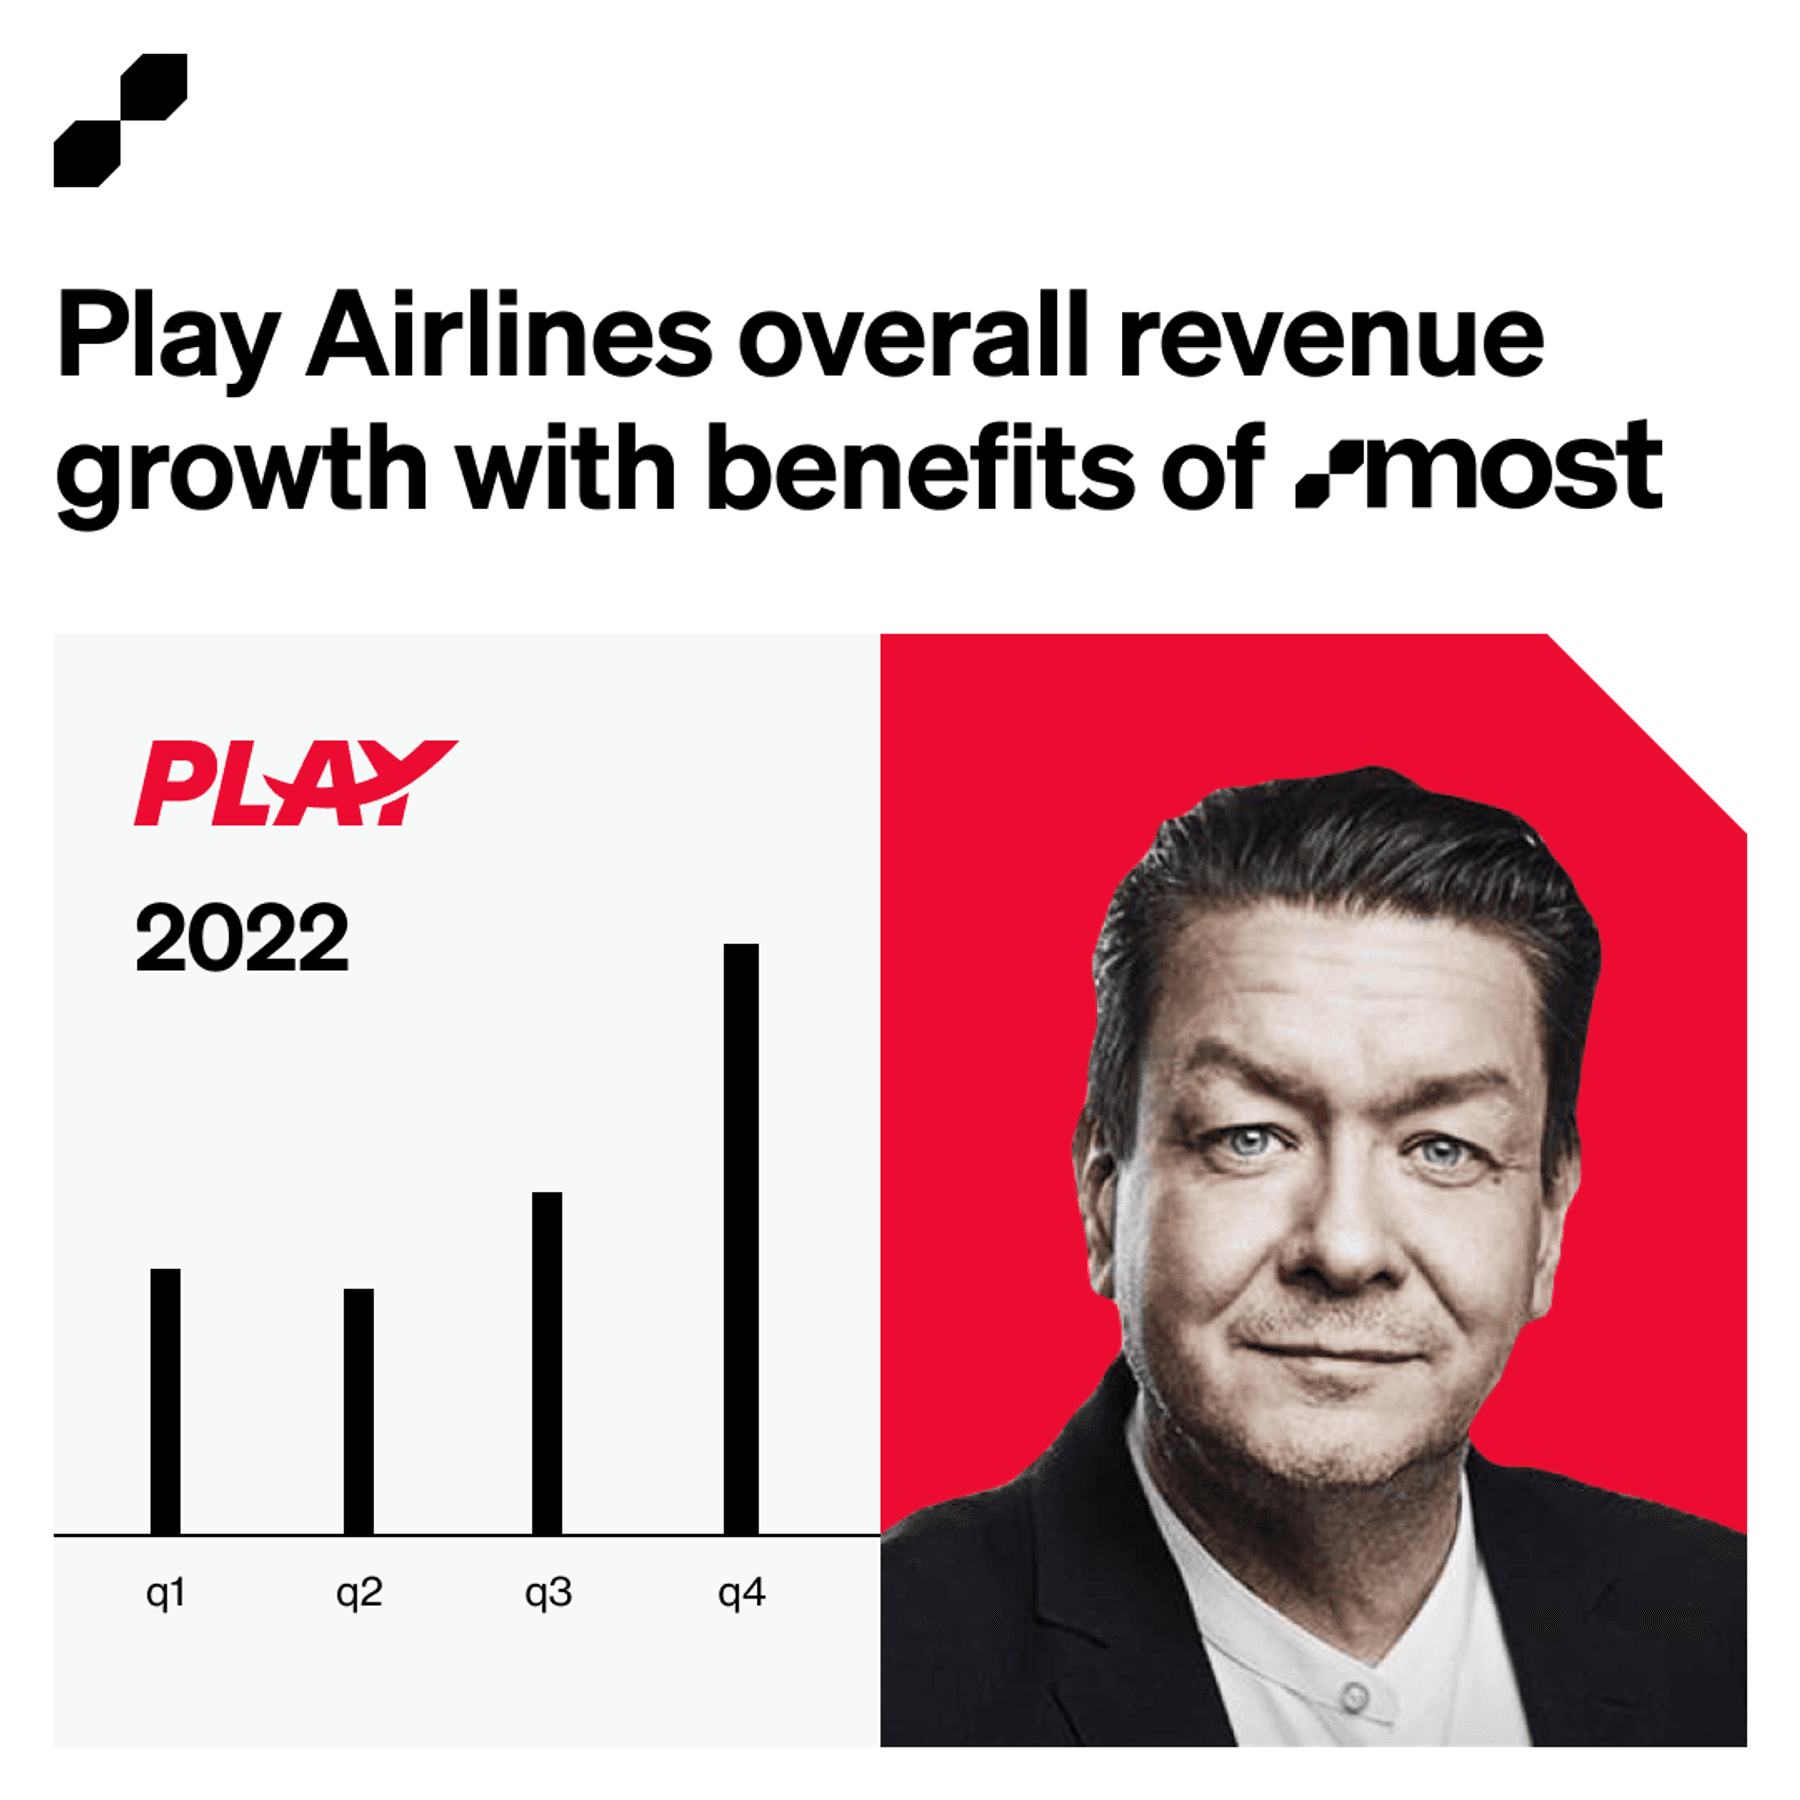 Play Airlines is increasing ancillary revenues